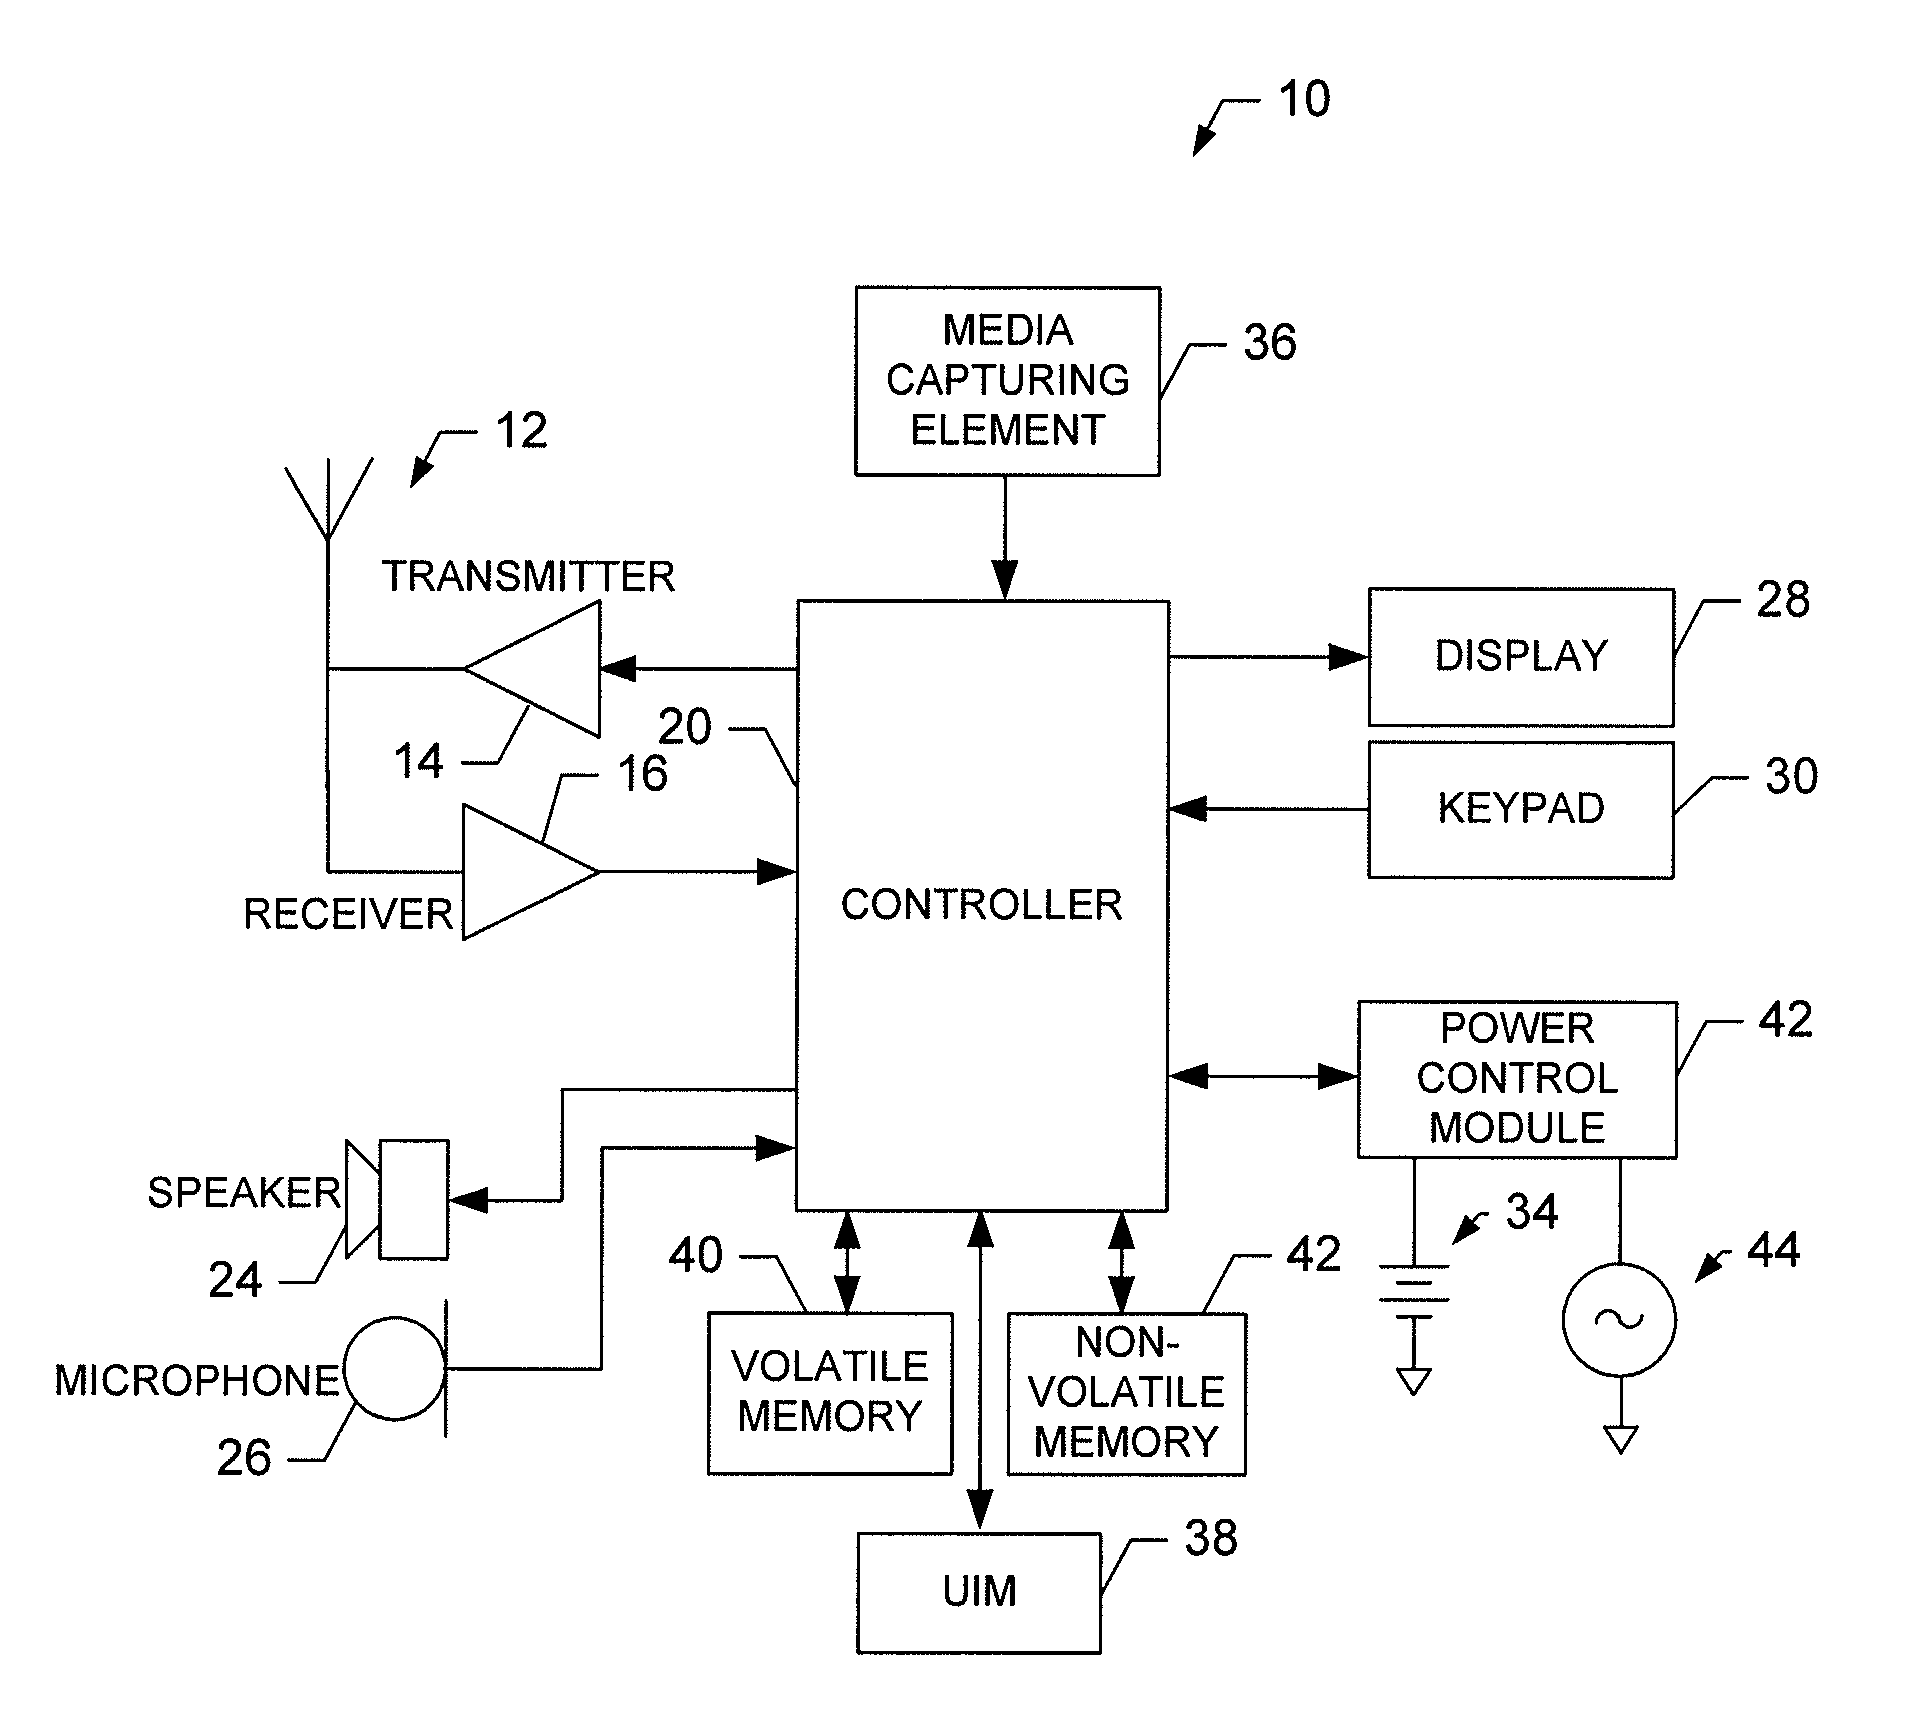 Method, apparatus and computer program product for providing power control security features